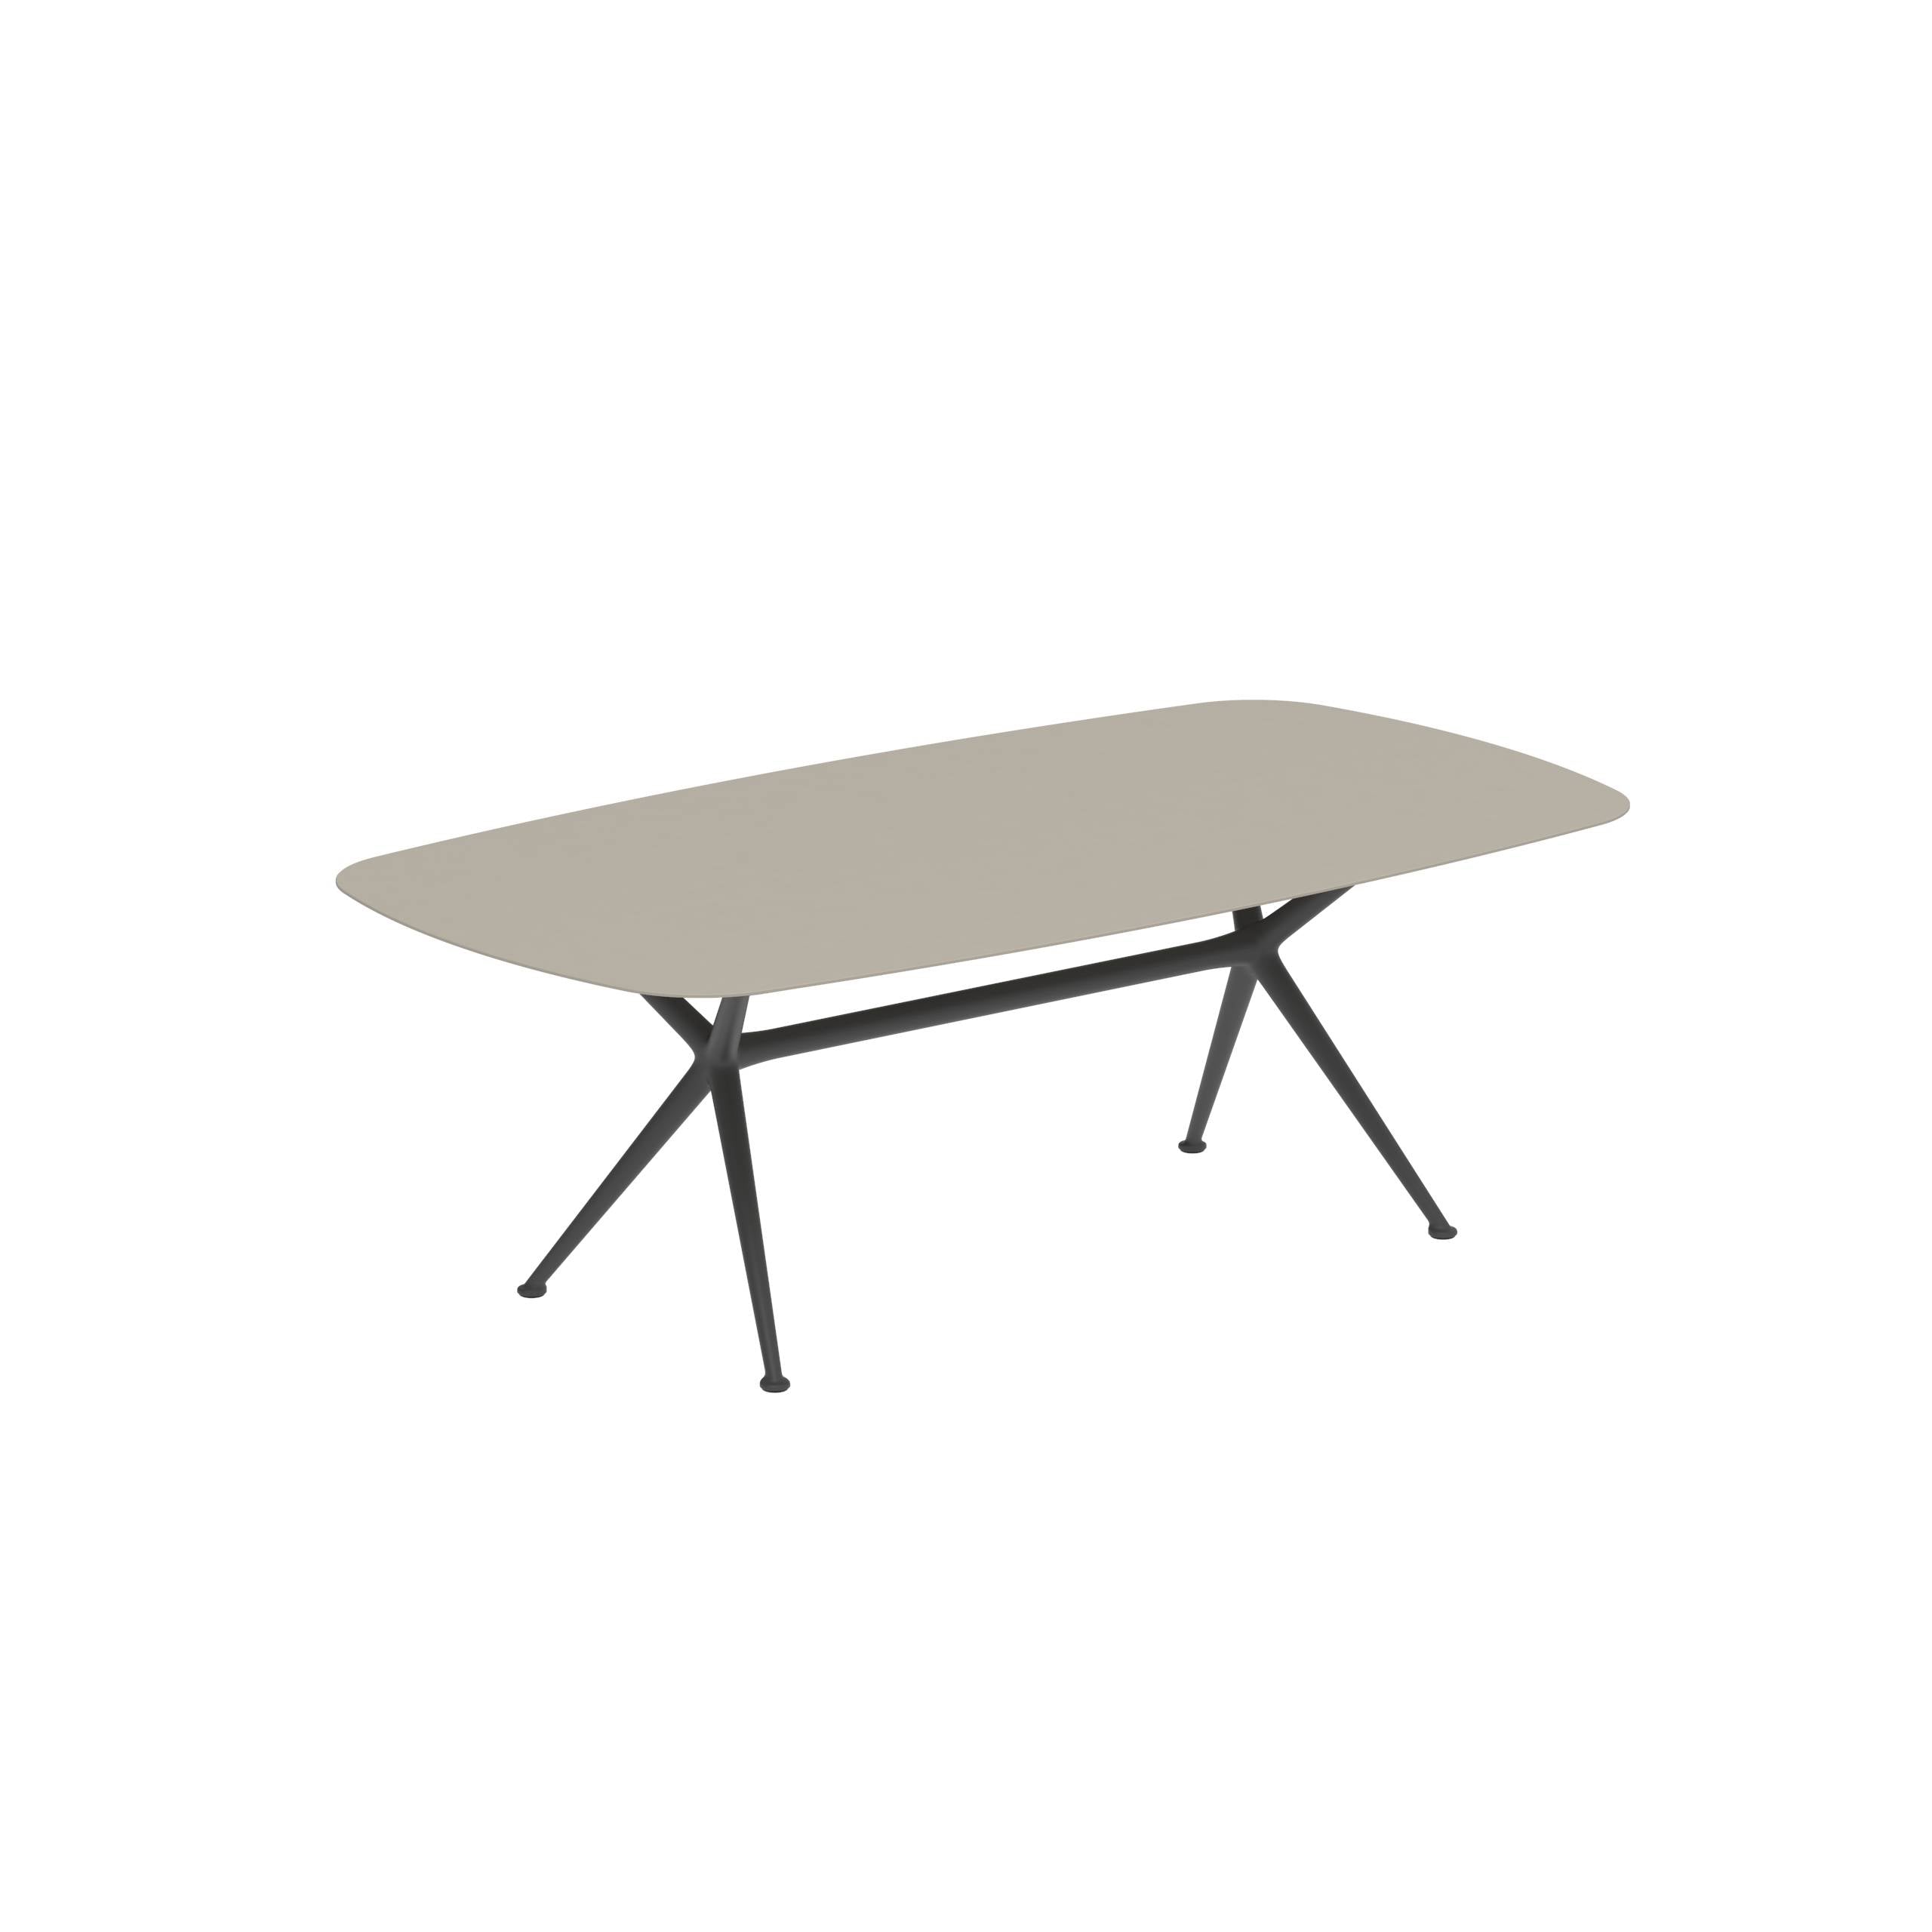 Exes Table 220x120cm Alu Legs Anthracite - Table Top Ceramic Pearl Grey